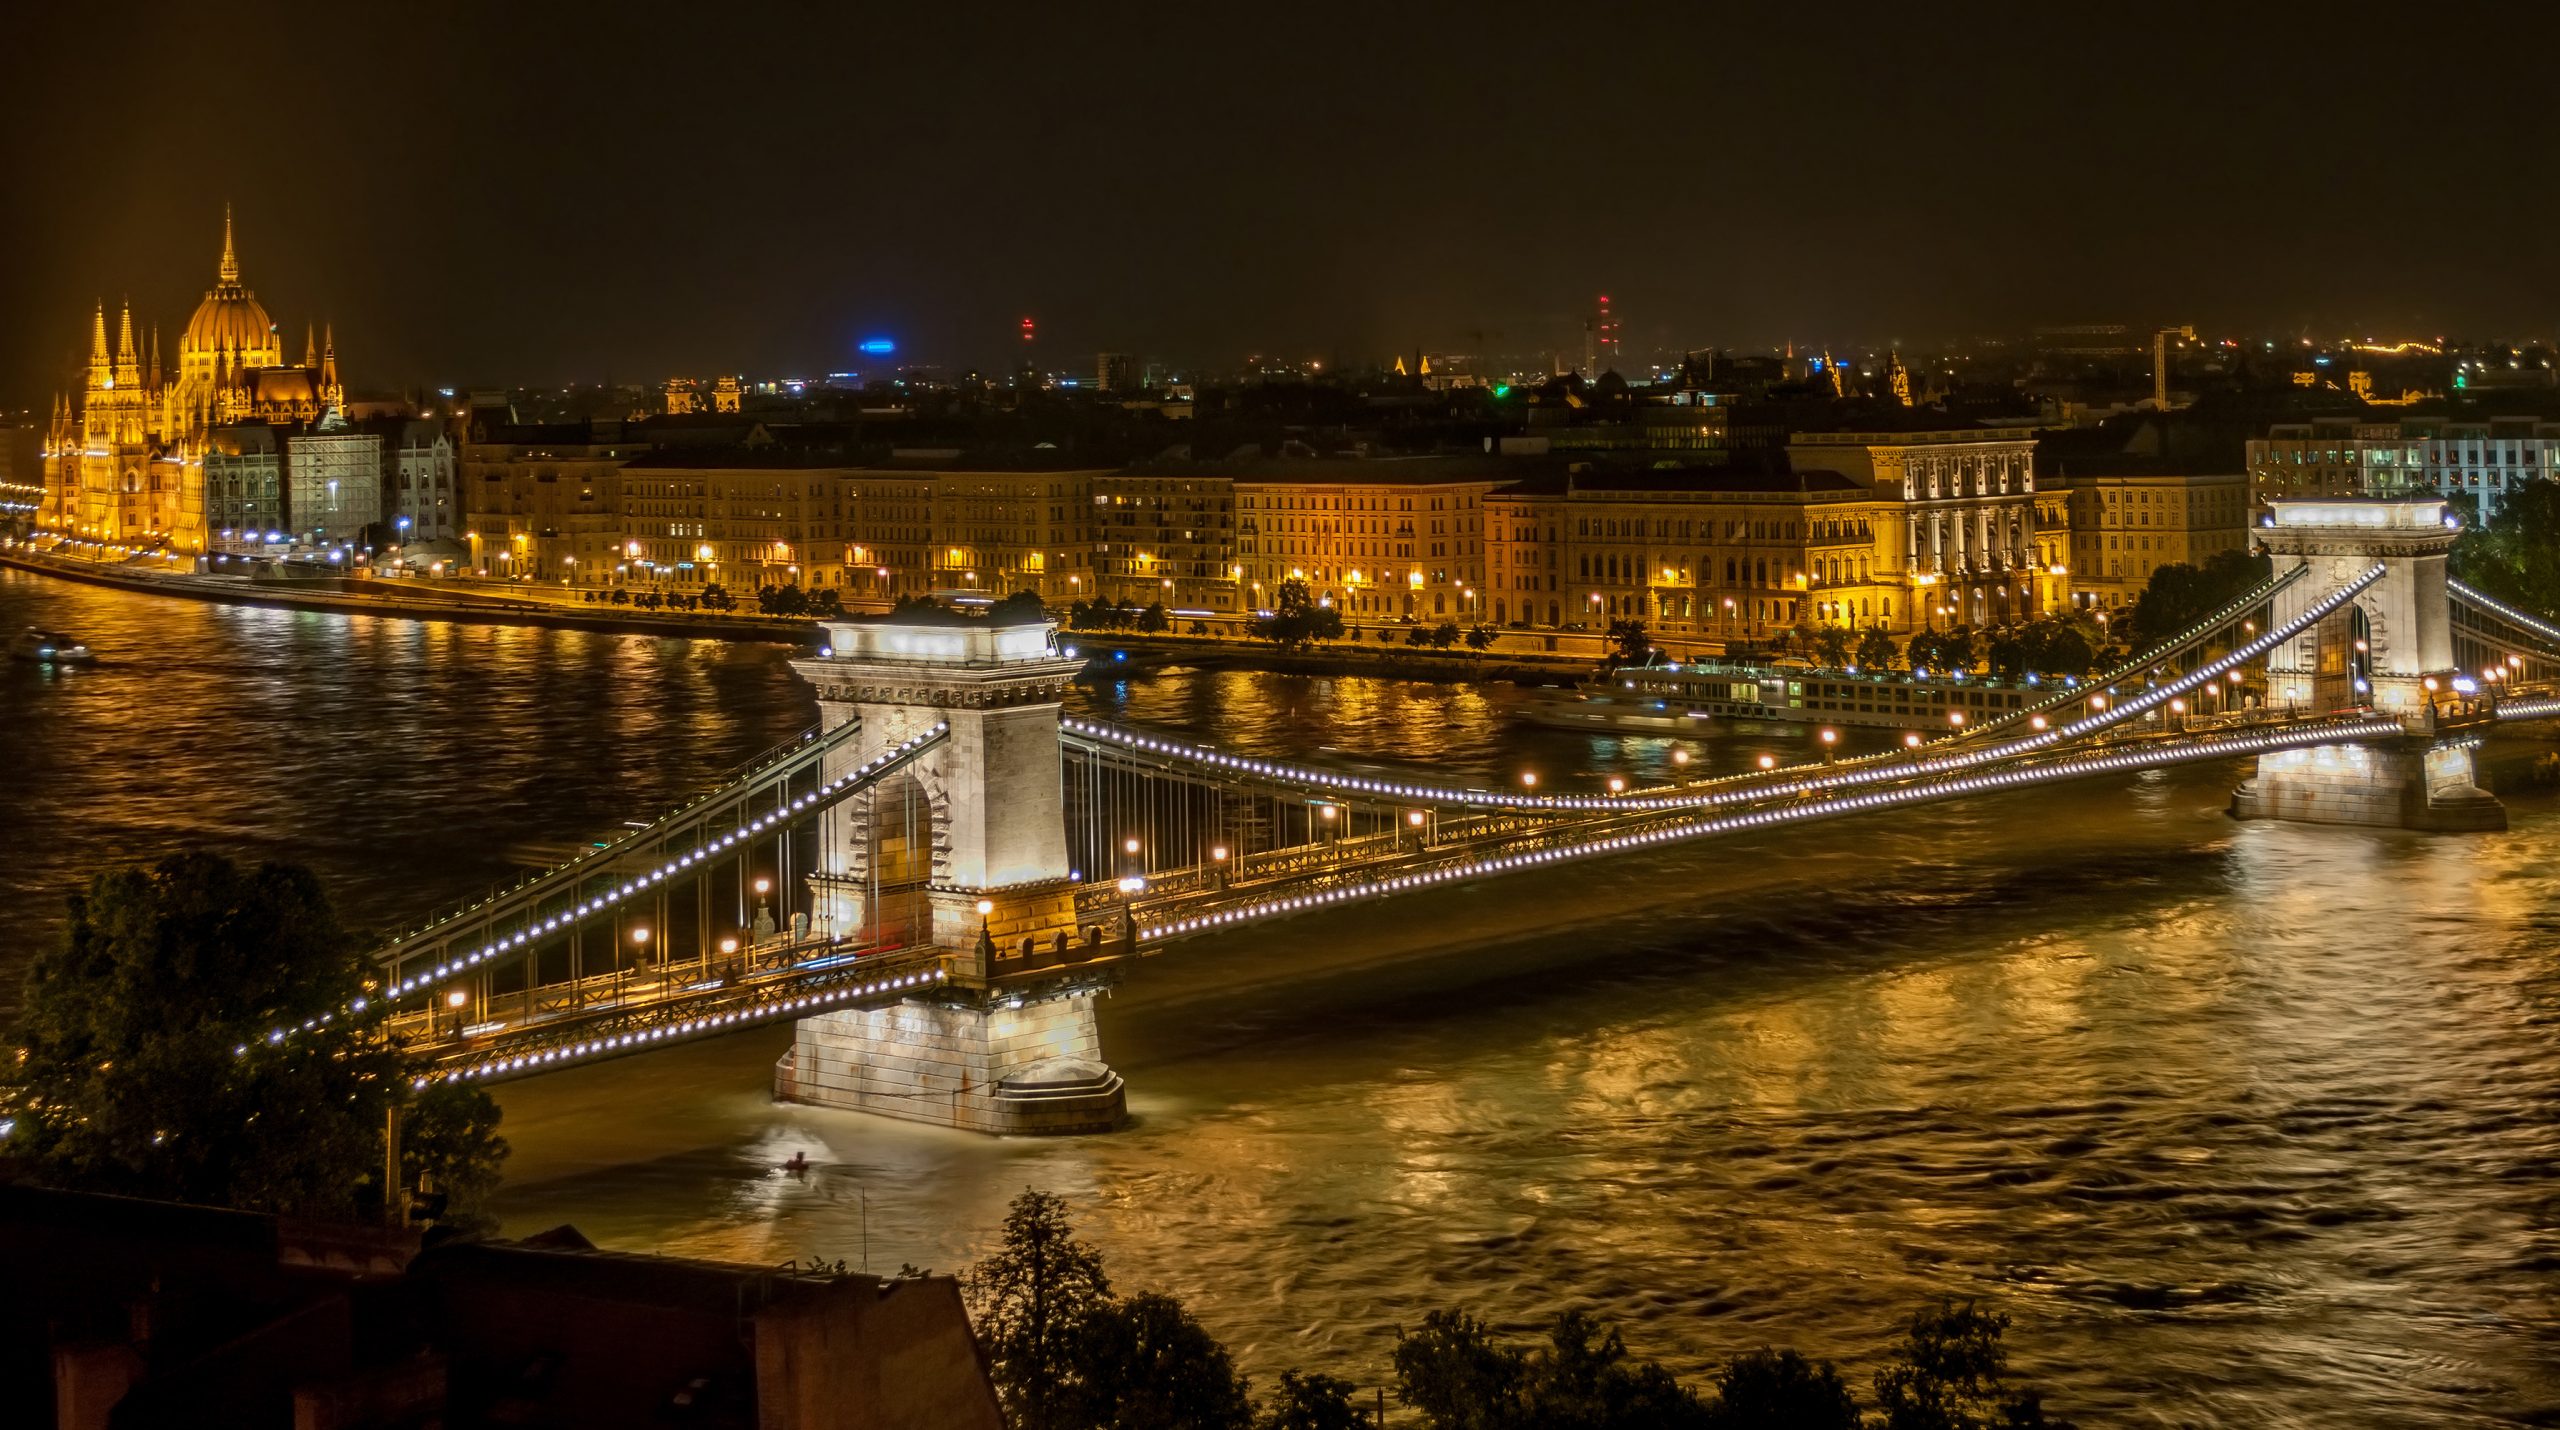 View of Budapest at night from Buda Castle. The Chain Bridge can be seen in the foreground.